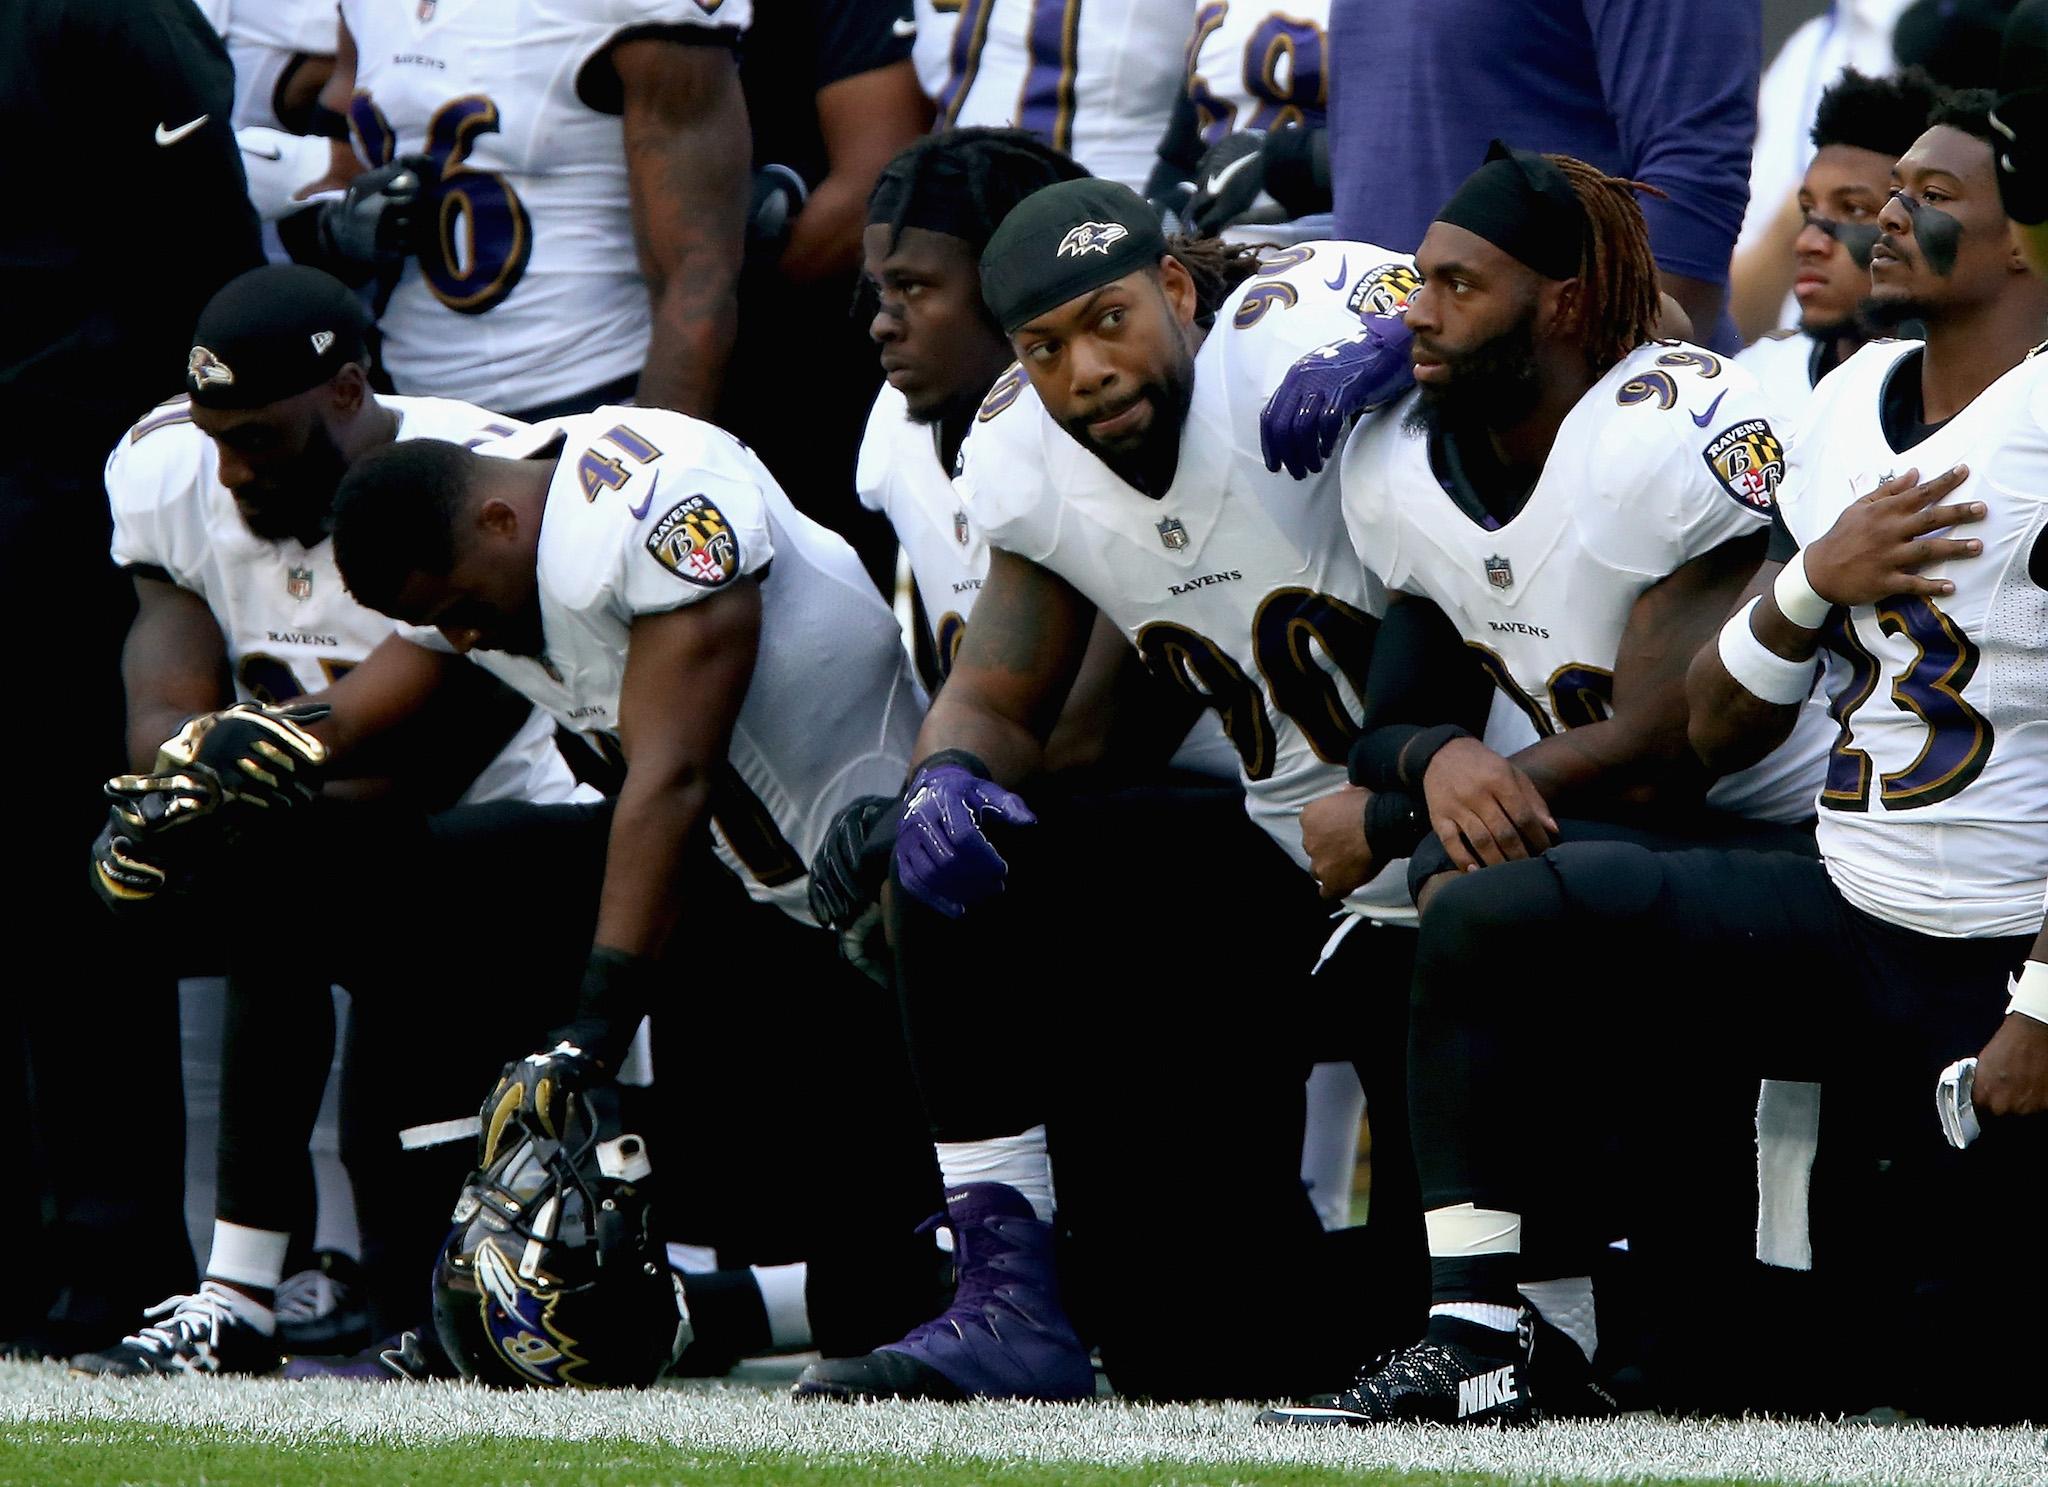 Baltimore Ravens players kneel for the American National anthem during the NFL International Series match between Baltimore Ravens and Jacksonville Jaguars at Wembley Stadium